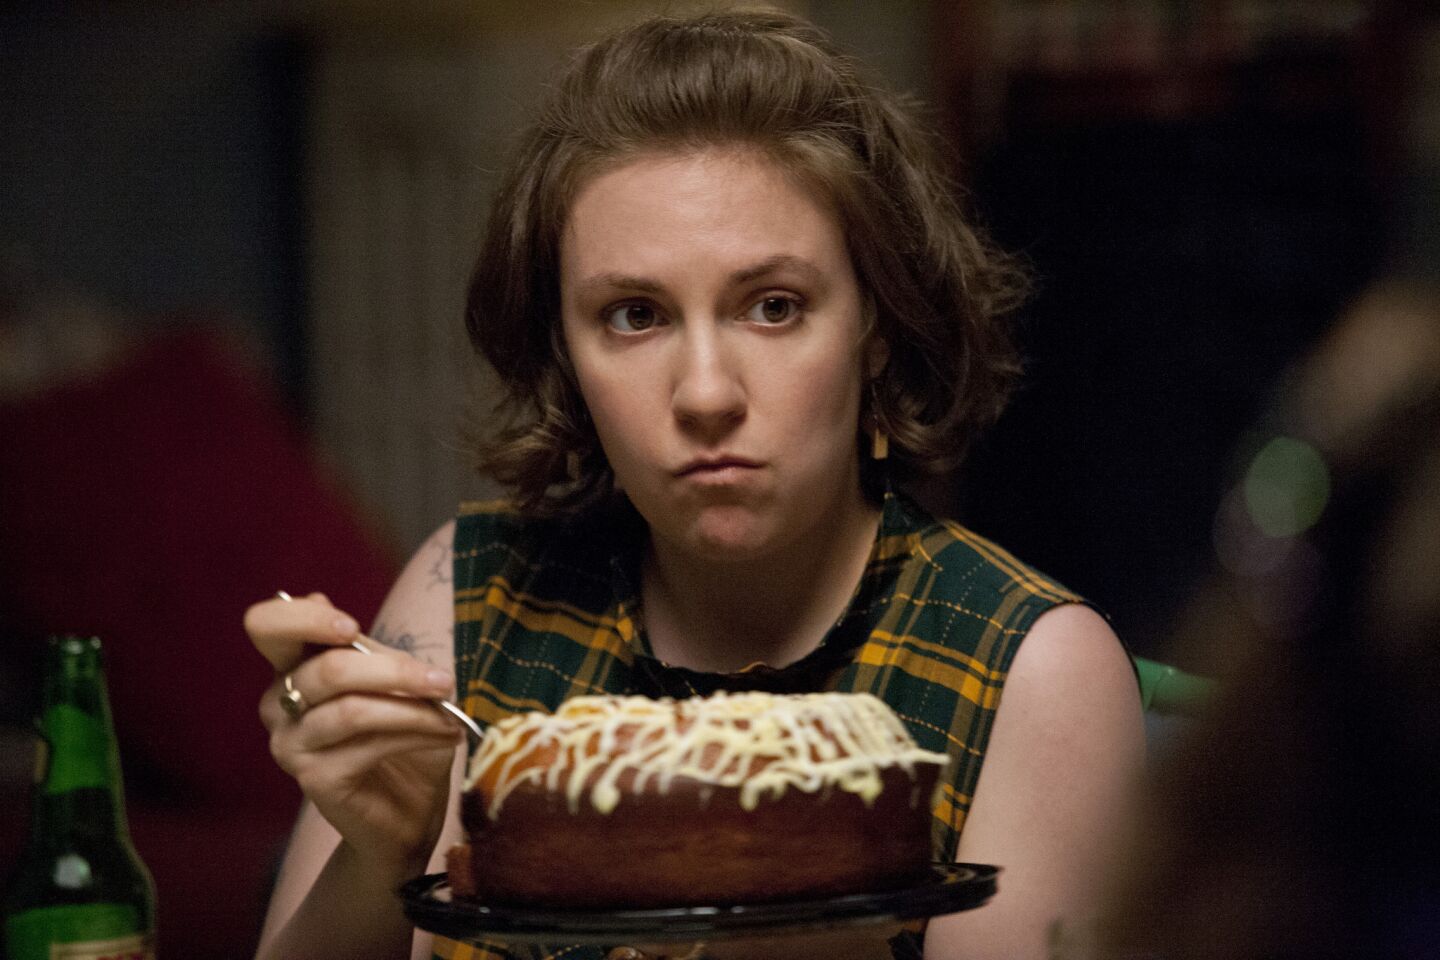 Comedy seriesLead actress in a comedy: Lena dunham (Hannah Horvath) Supporting actor in a comedy: Adam Driver (Adam Sackler) Director for a comedy: Lena Dunham ("On All Fours")